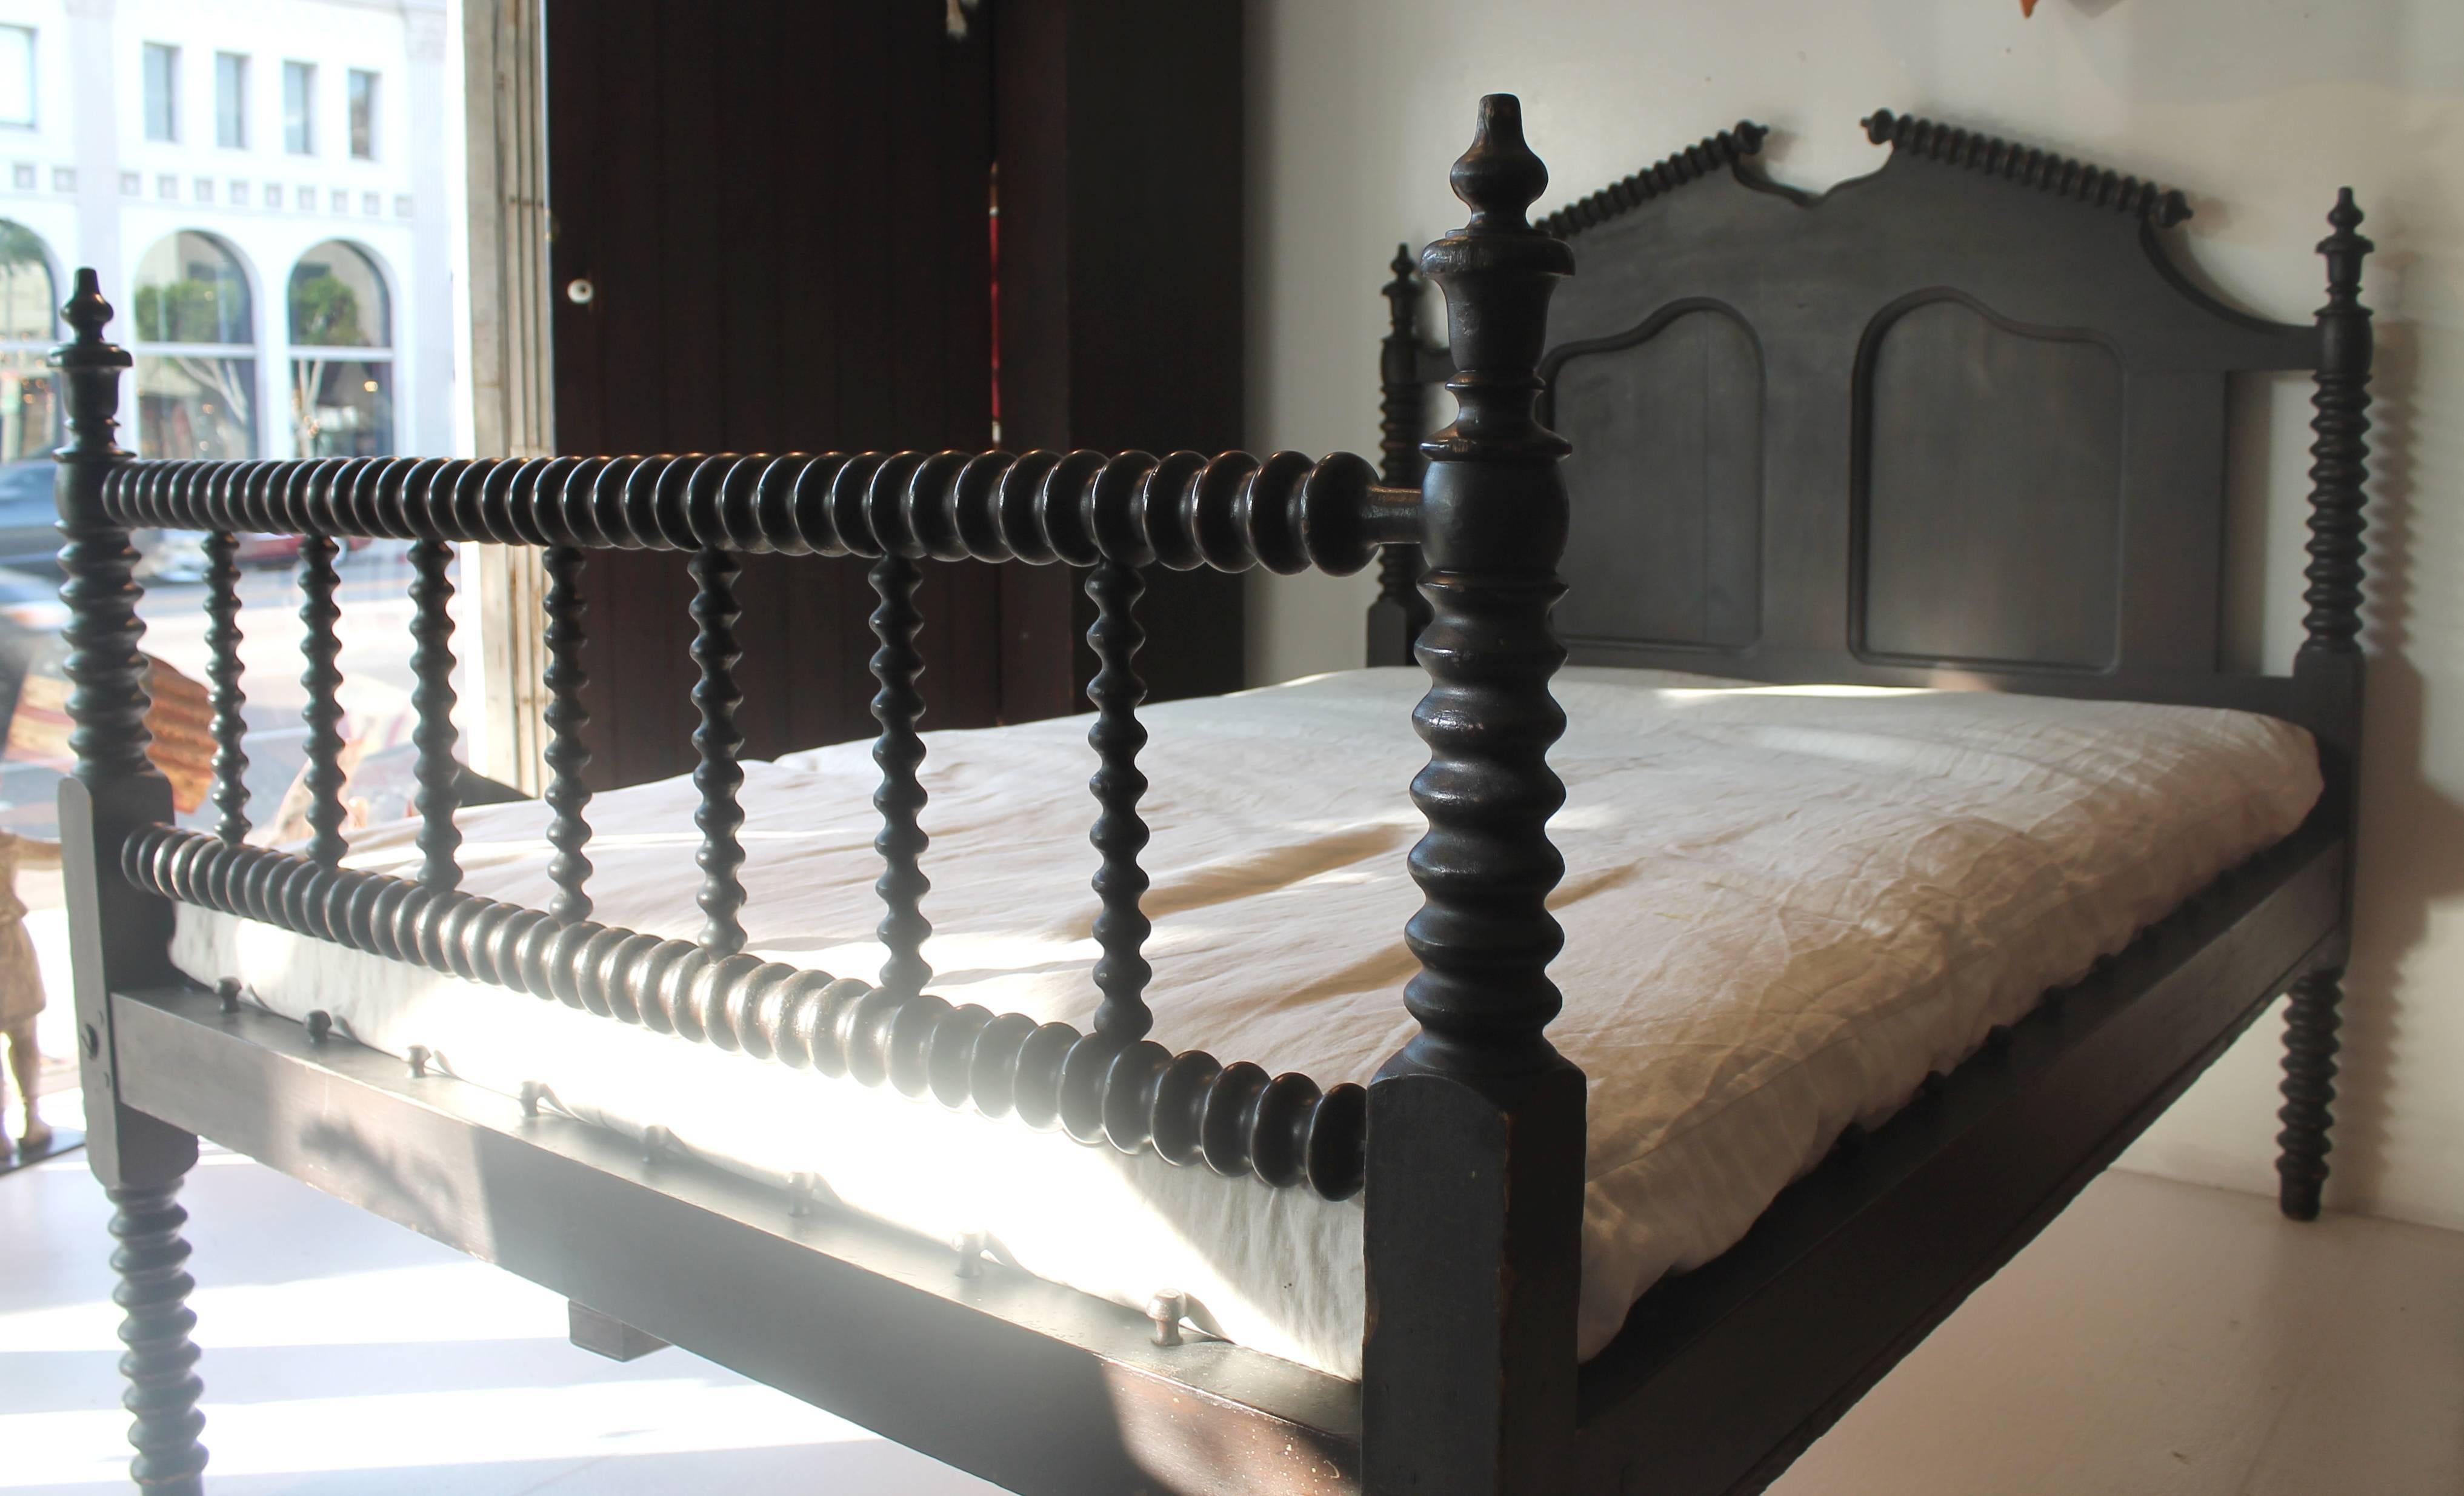 This wonderful 3/4 original dark brown painted bed is in very good condition and has a custom-made homespun linen duvet cover. The insert of the mattress is down and feather fill with a foam core. This bed is 3/4 bed, just a bit smaller then a full